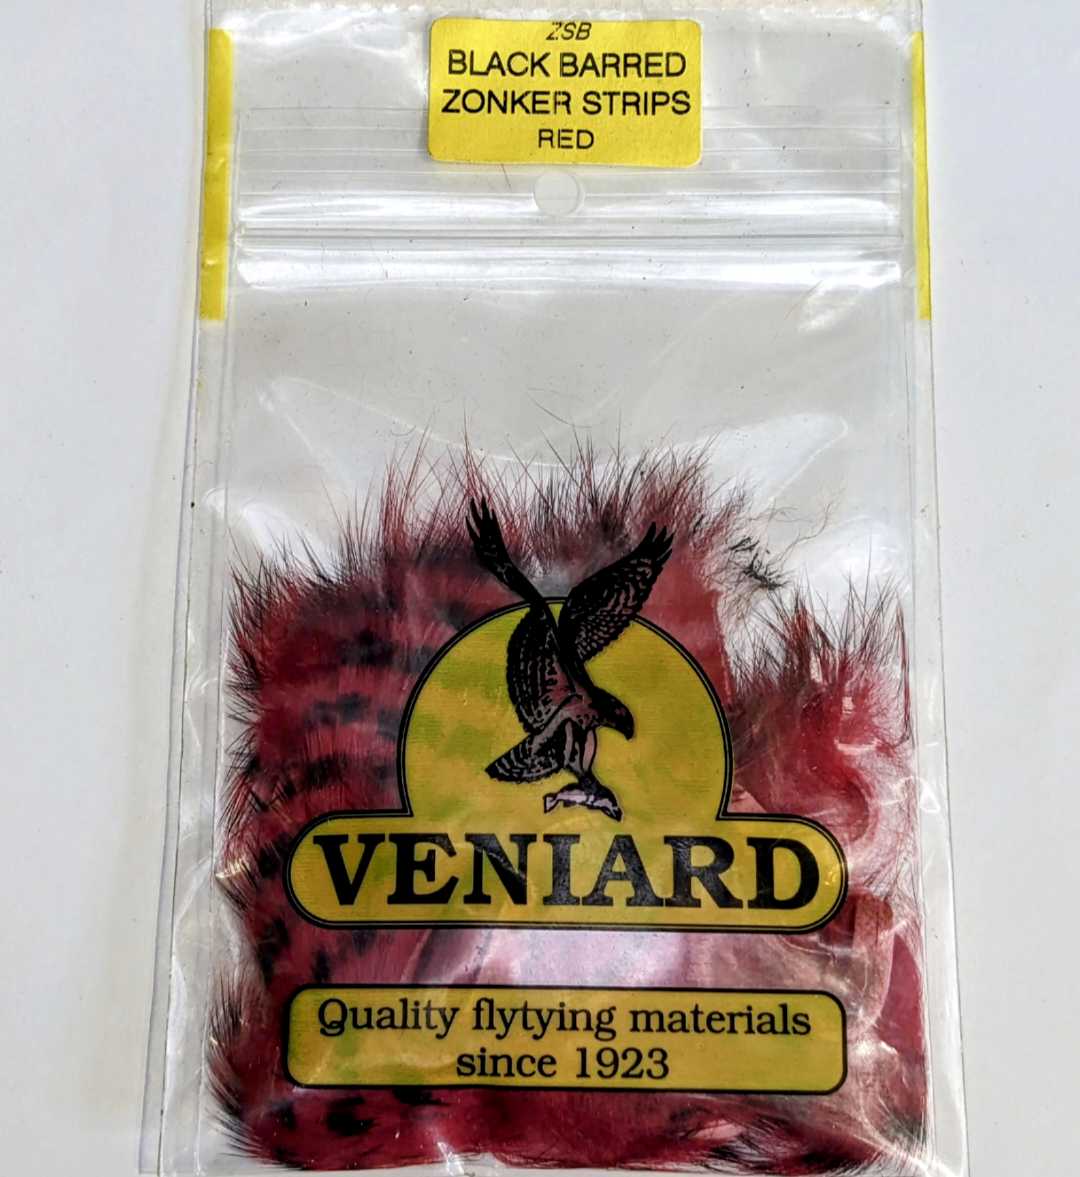 Black Barbed Zonker Strips Fly Tying Material - www.nafni.com